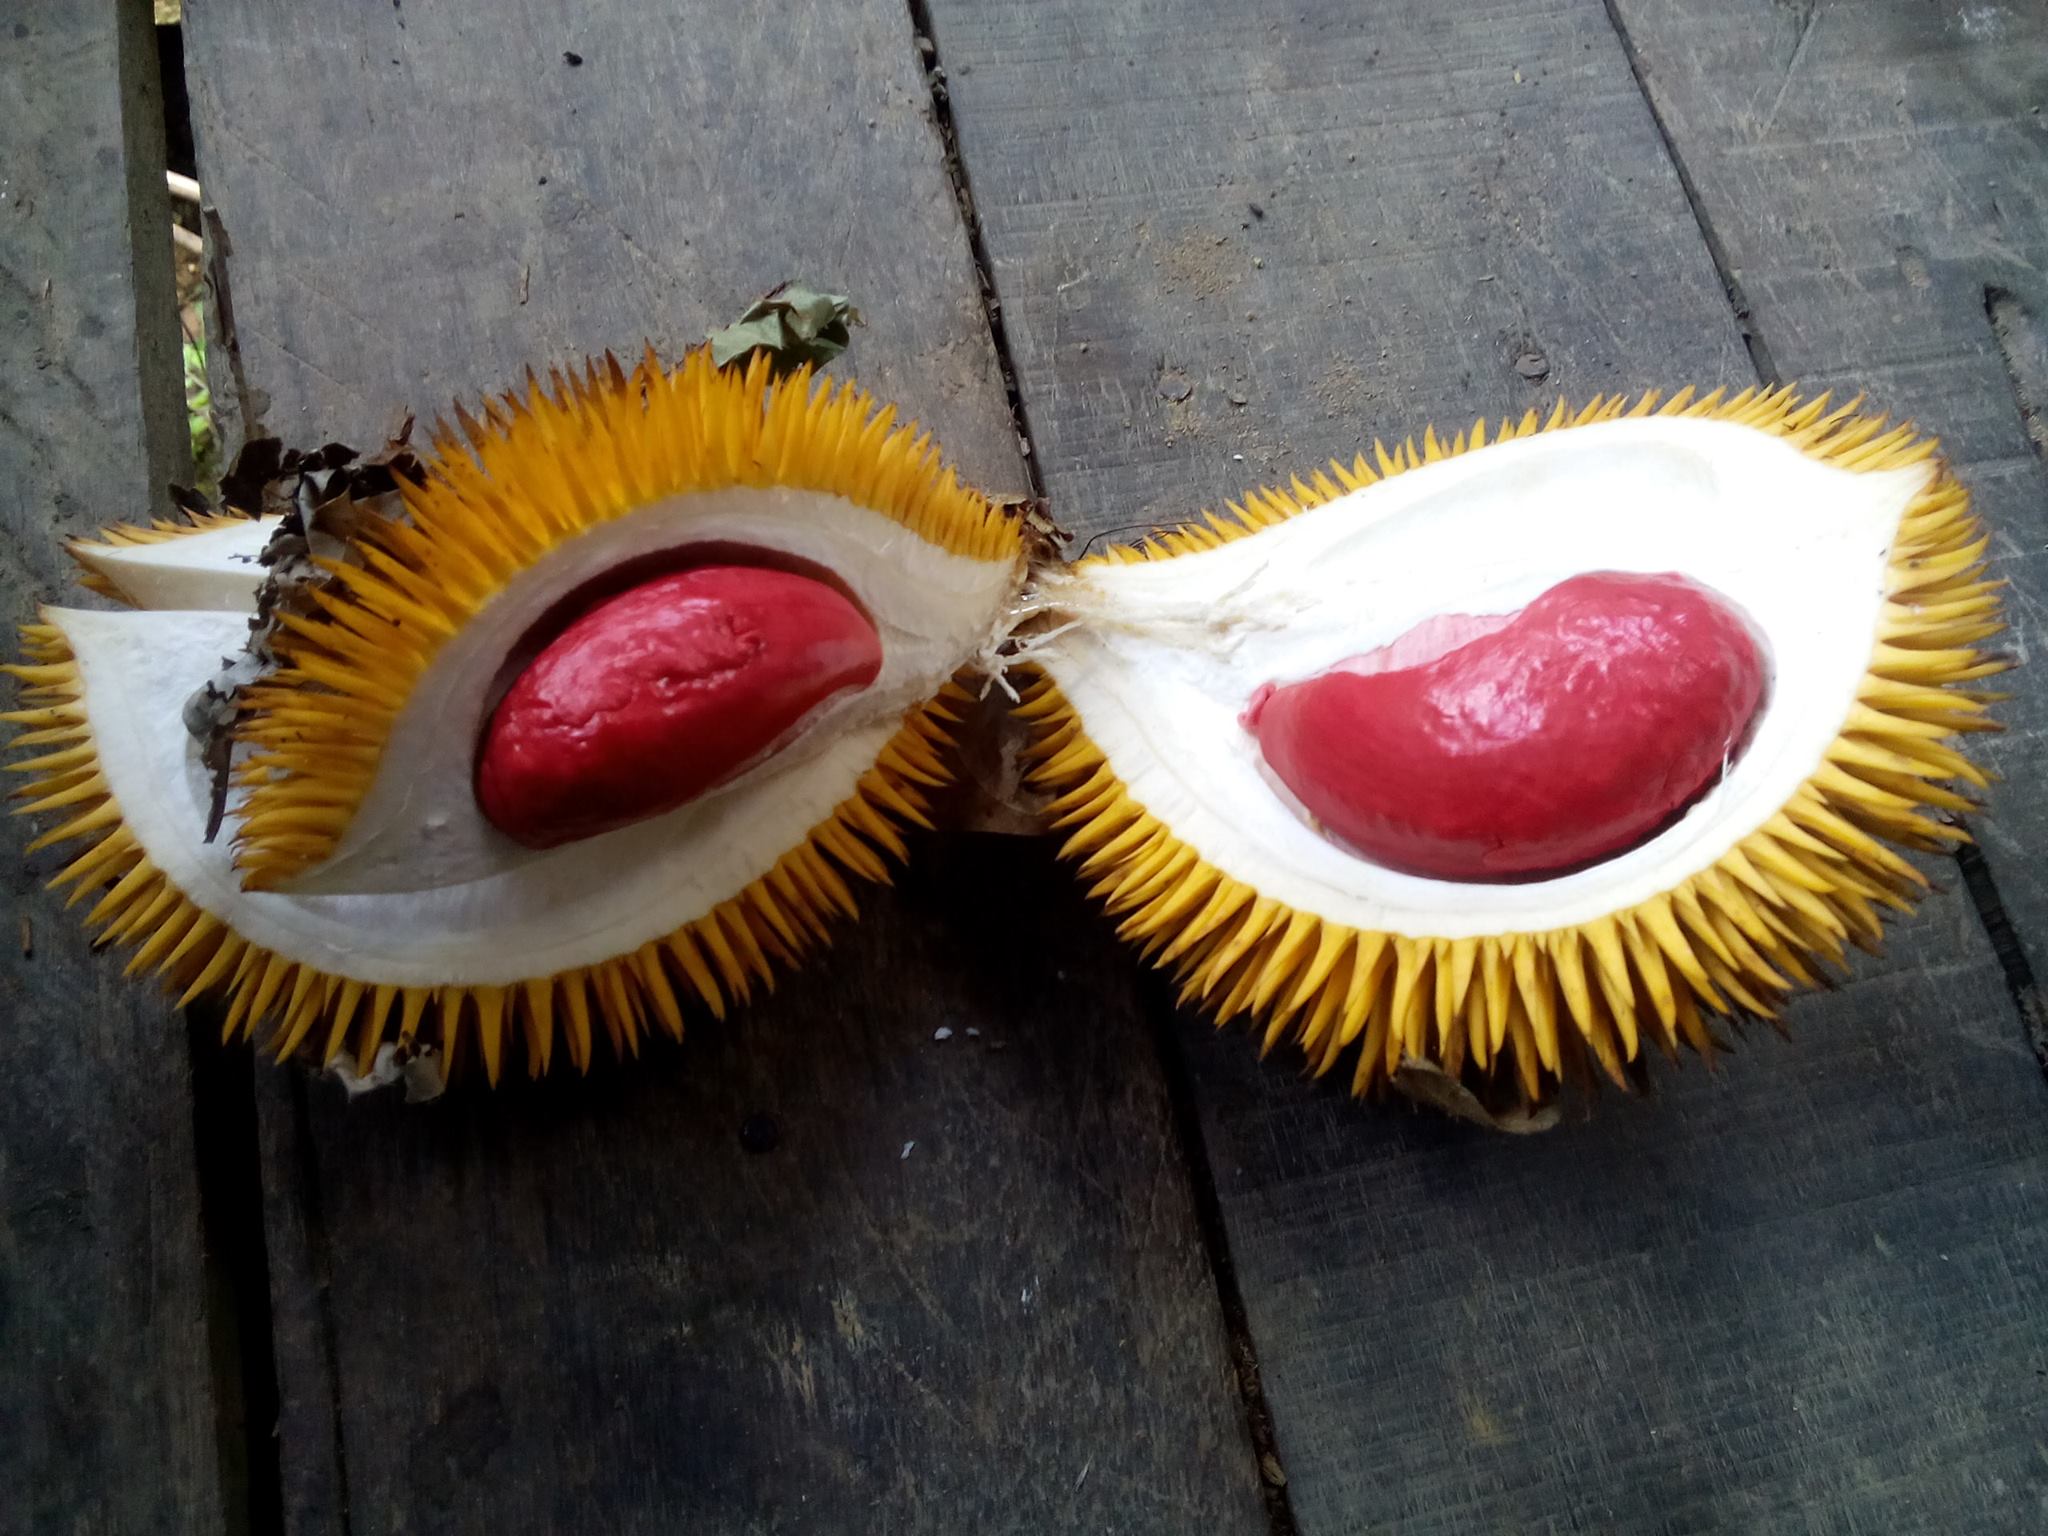 Durian with red flesh